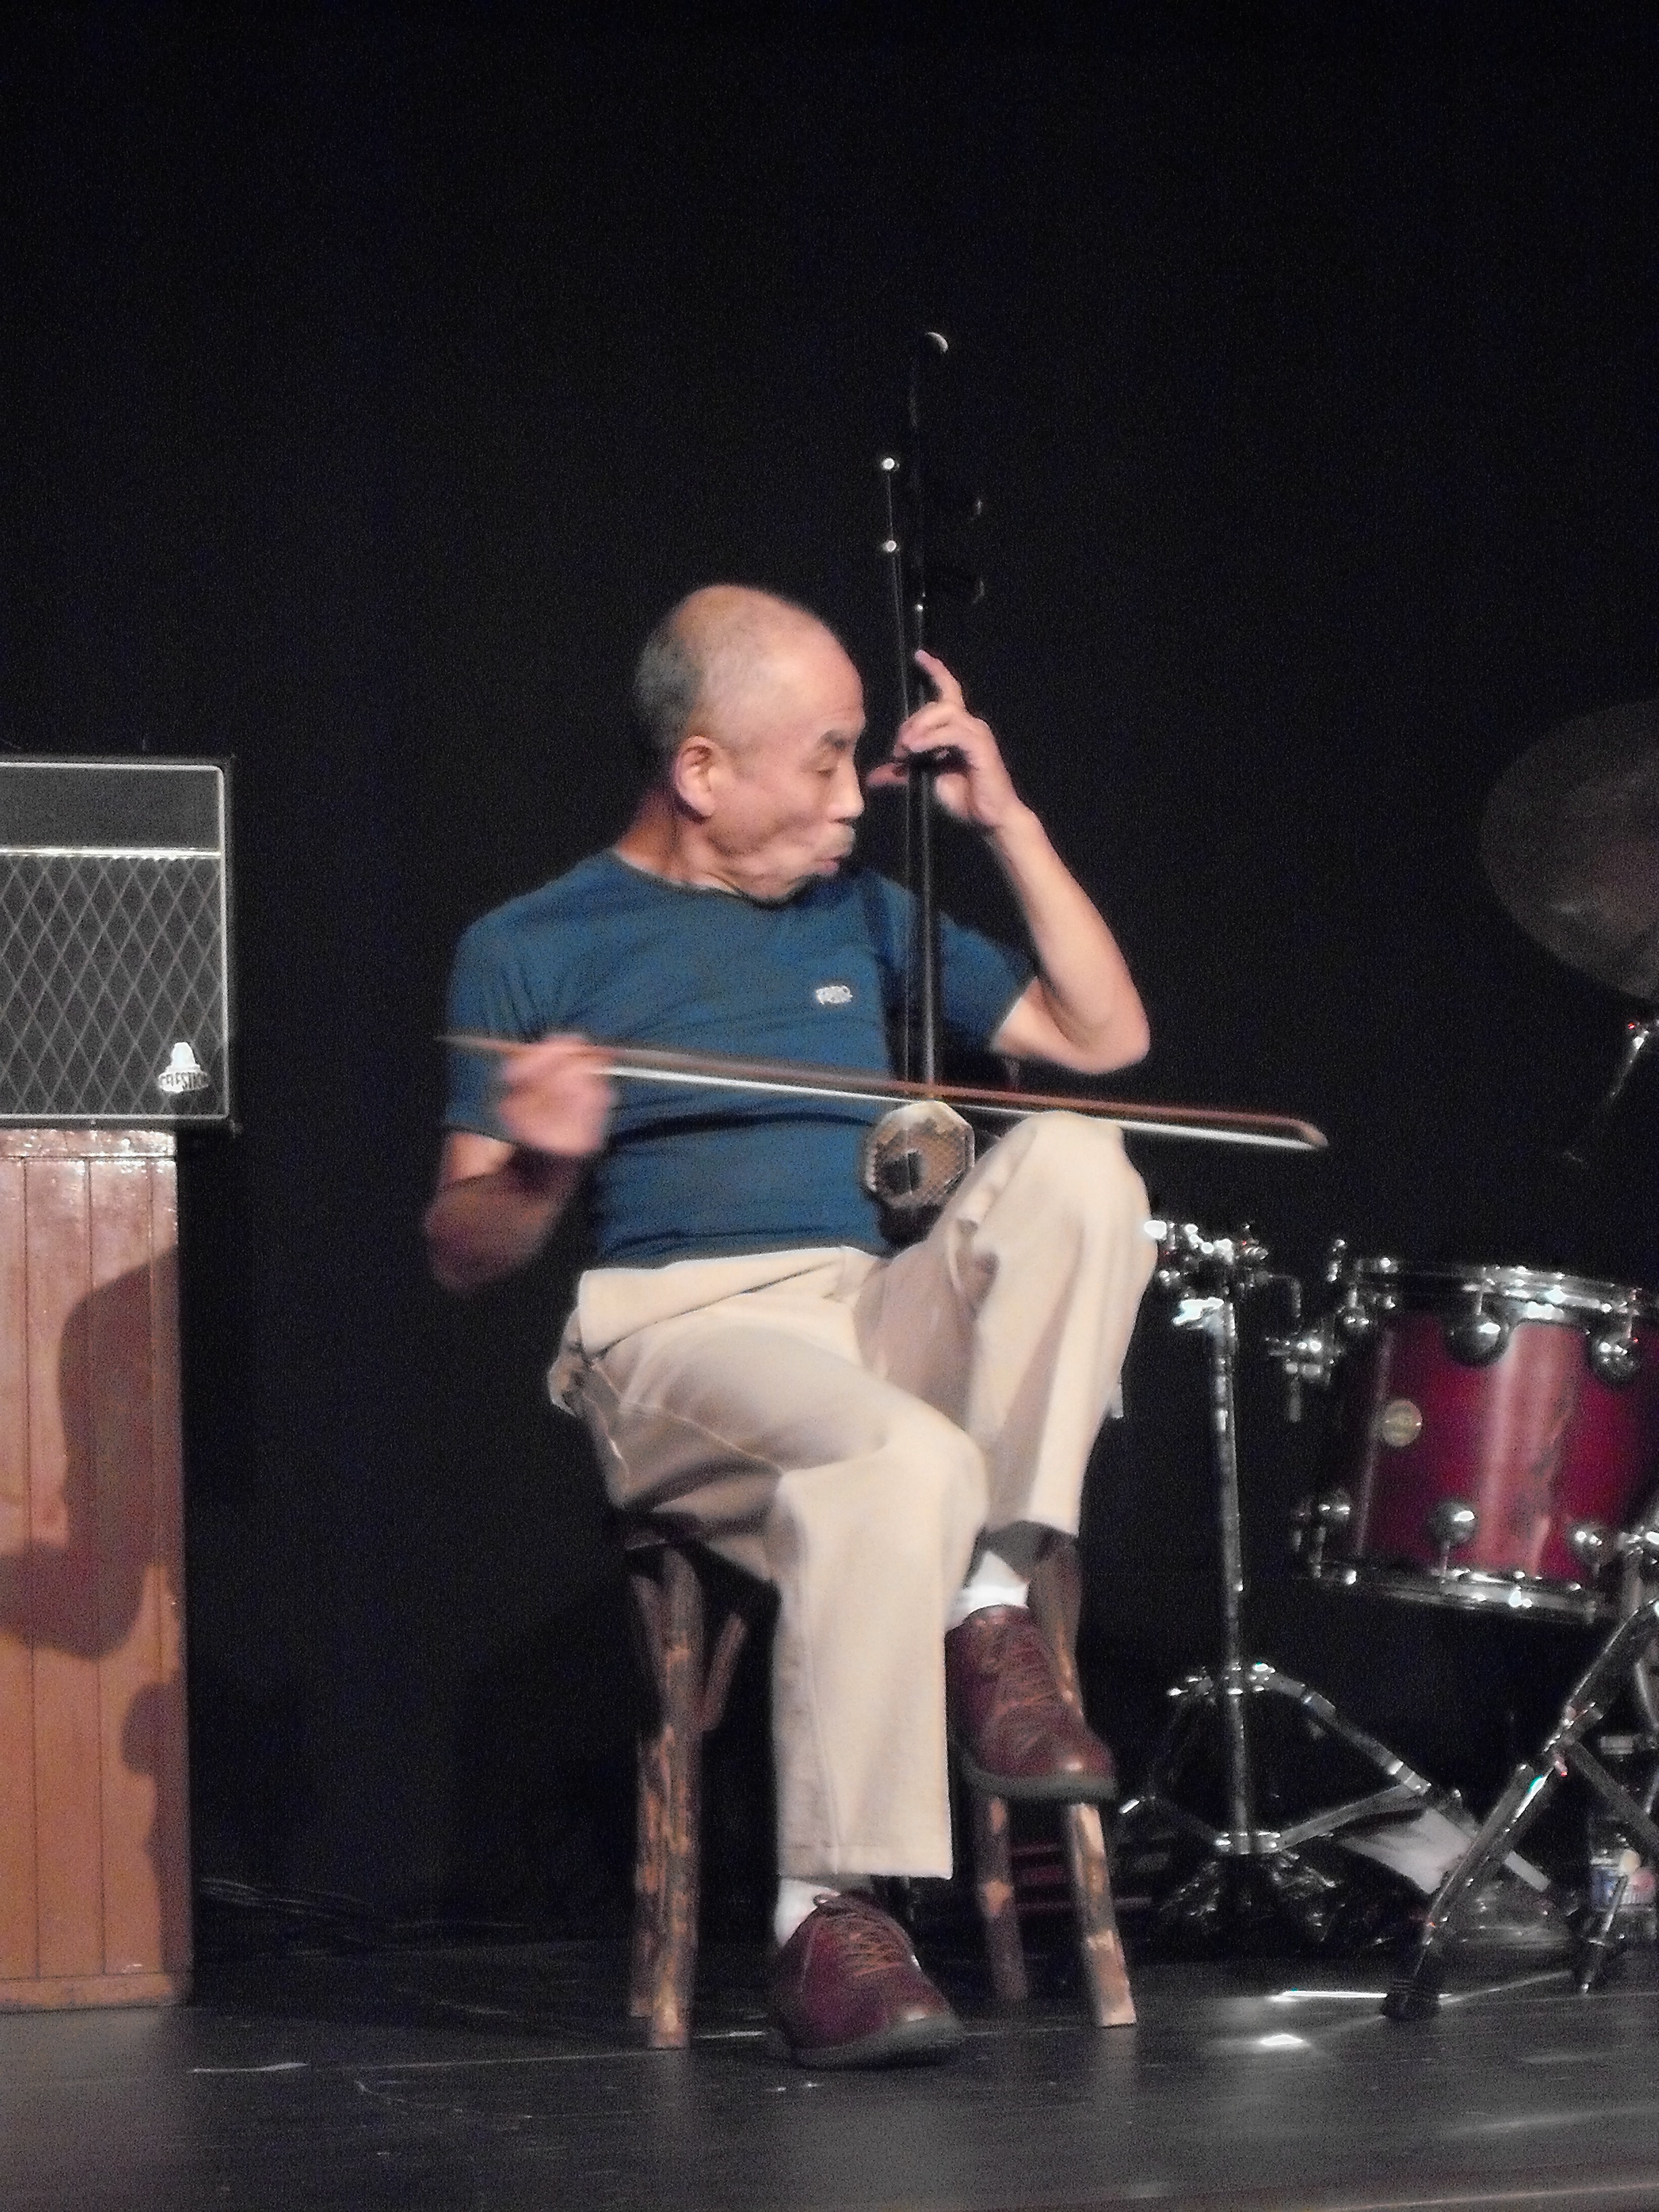 Sabu is not only one of the foremost Japanese free jazz drummers, he gives a dramatic performance on the Kokyo, a traditional Japanese 3-string instrument played with a bow